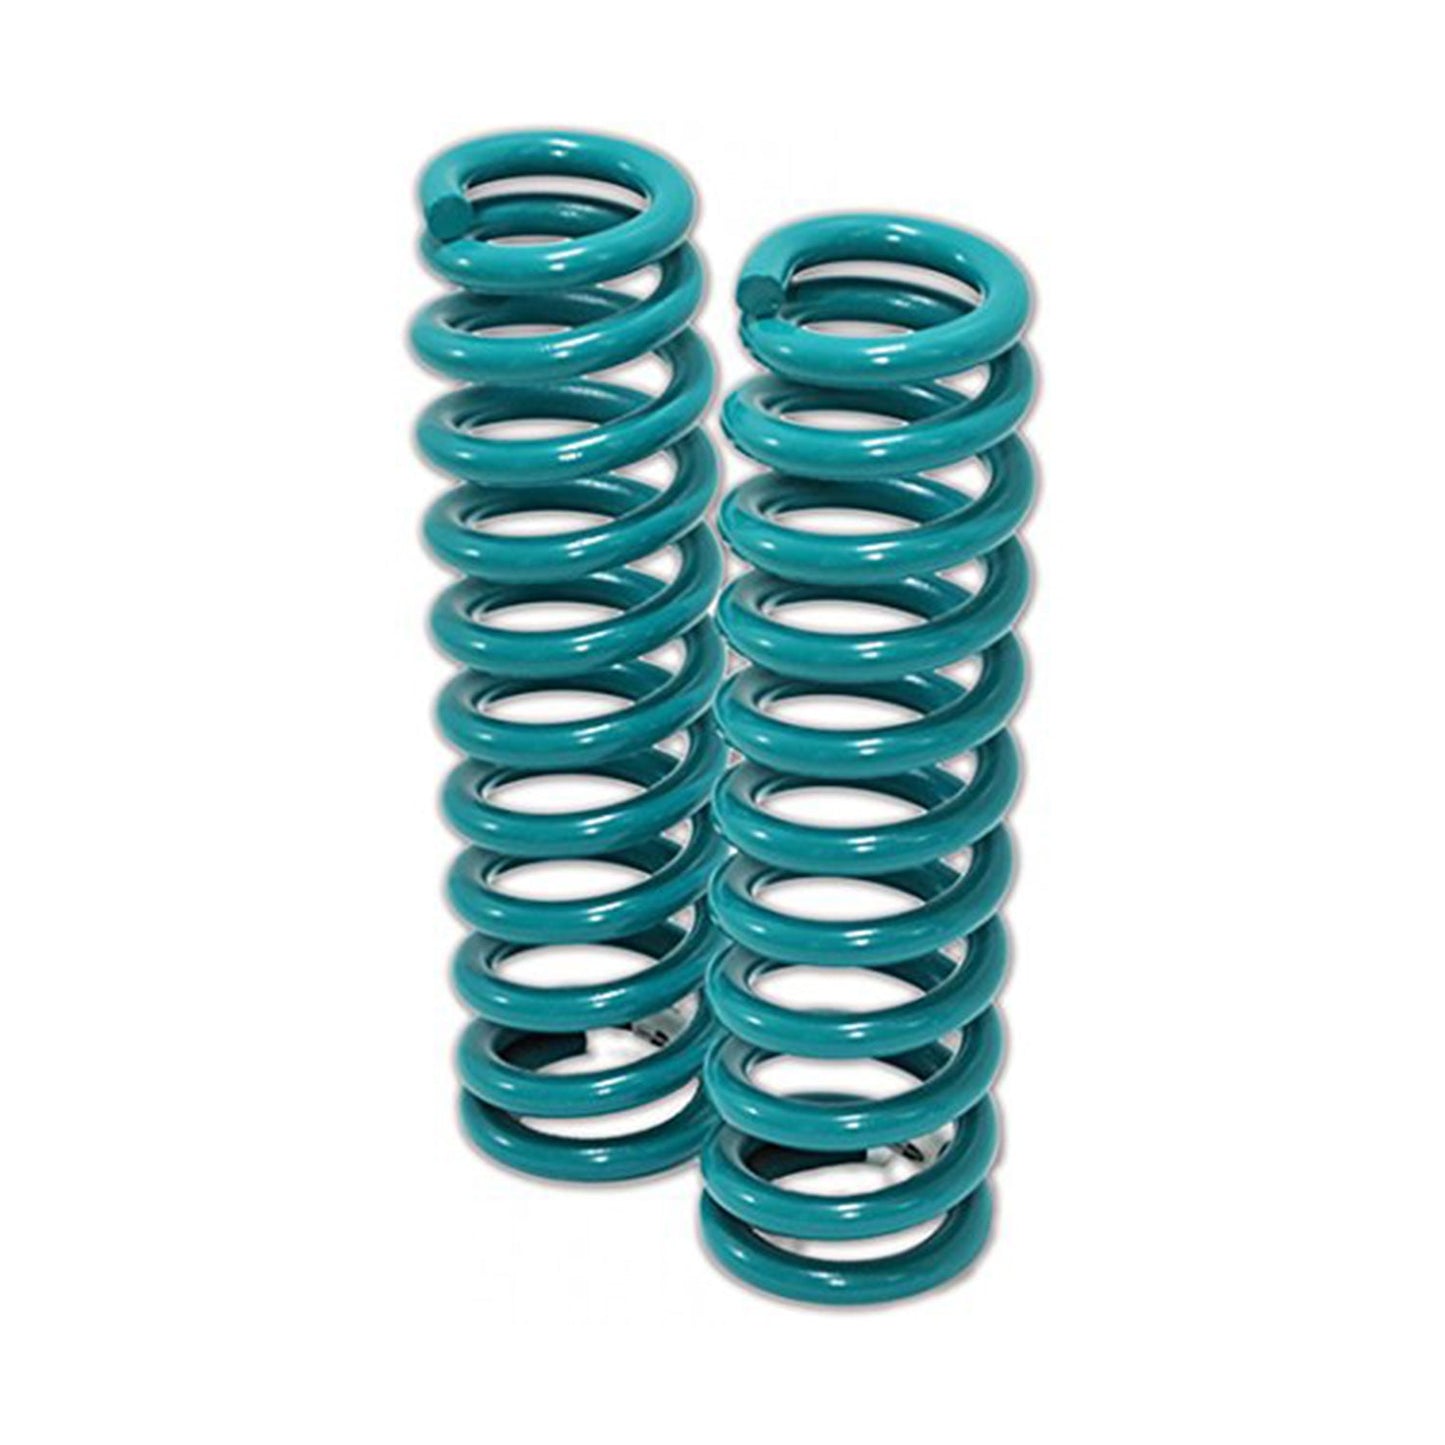 Dobinsons Front Lifted Coil Springs for Toyota 4x4 Trucks and SUV's (C59-736)